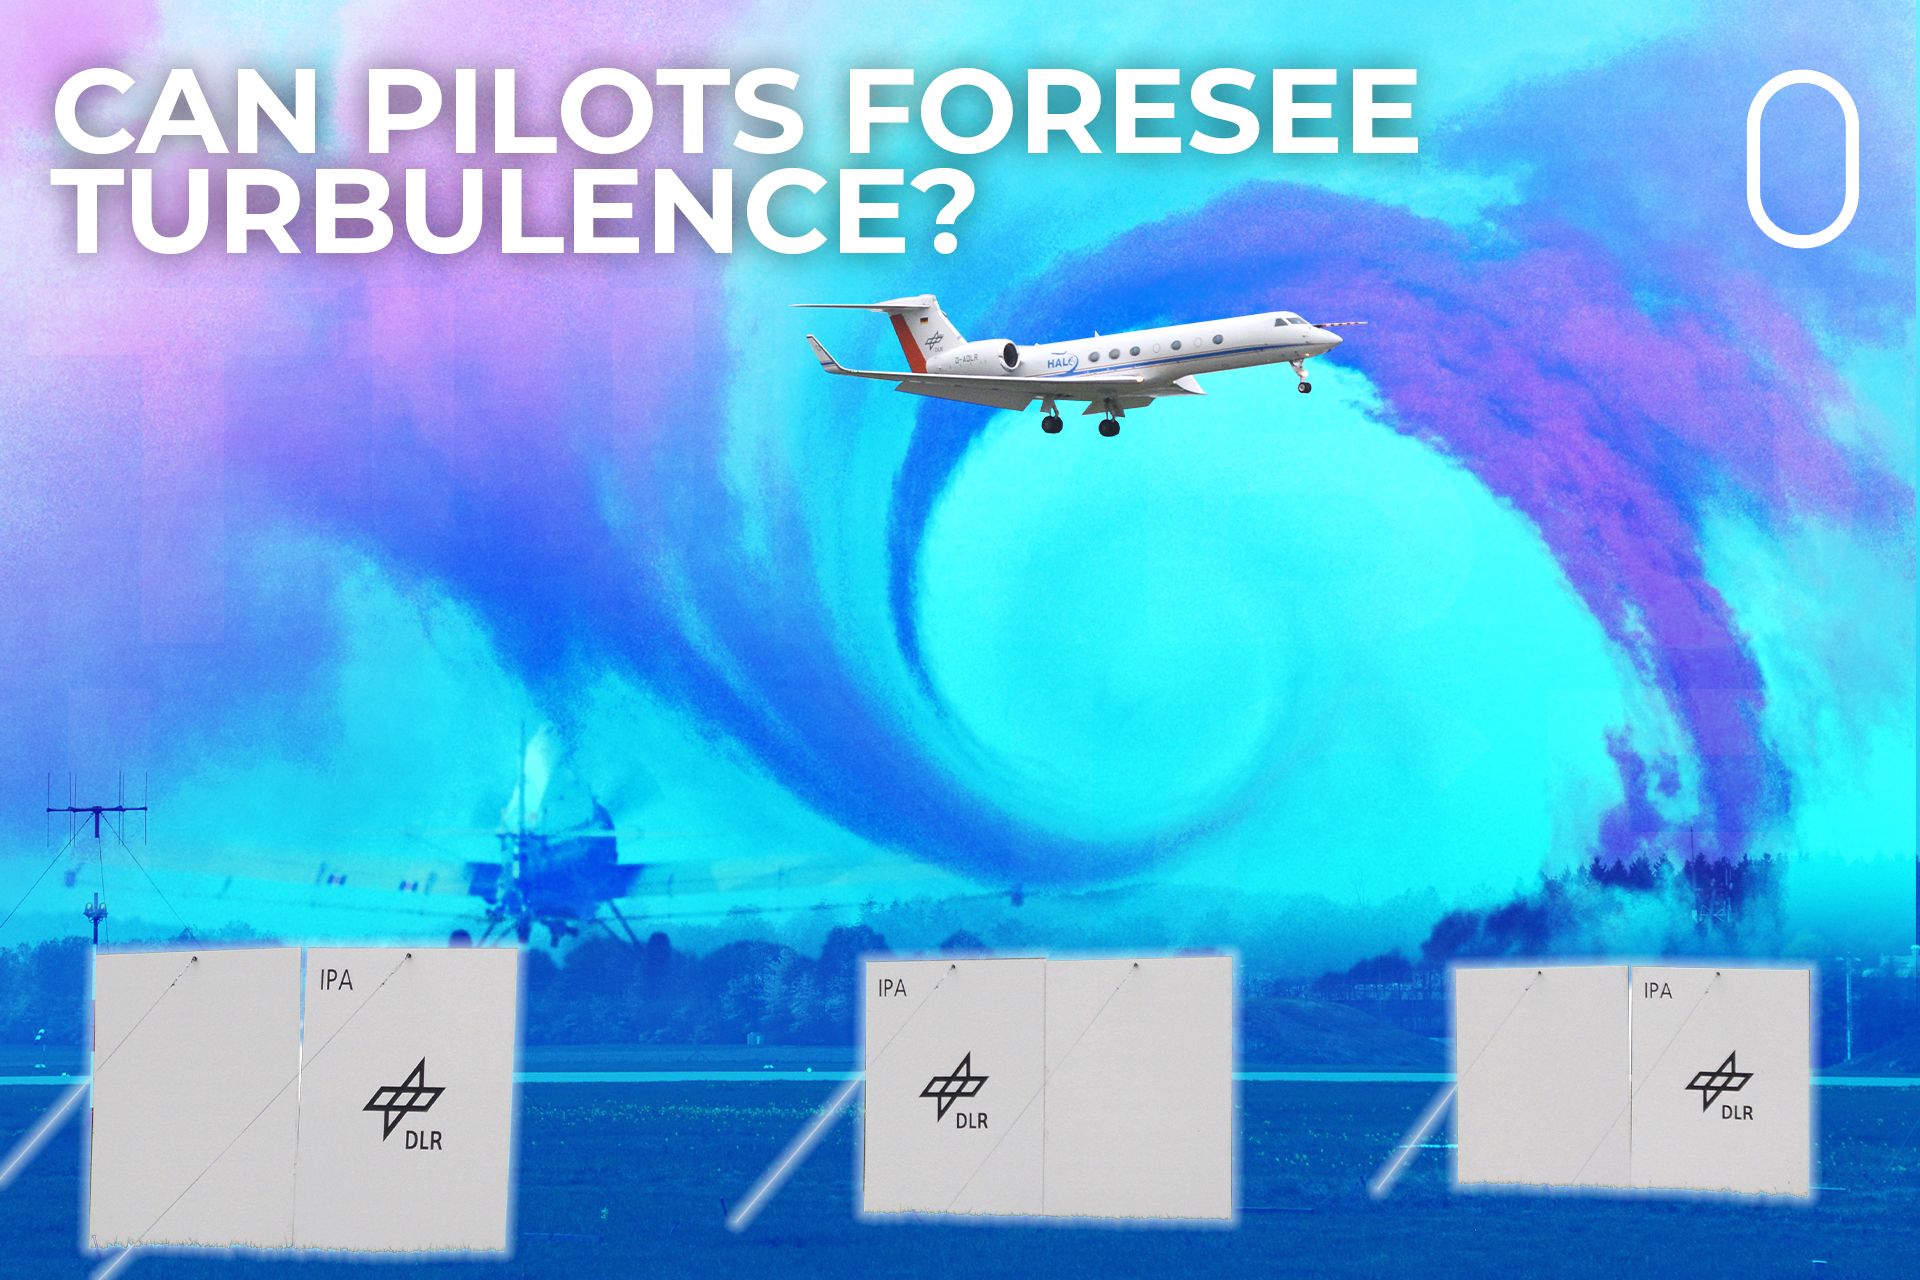 Predicting Choppy Skies: How Do Pilots Know When Turbulence Is Ahead?